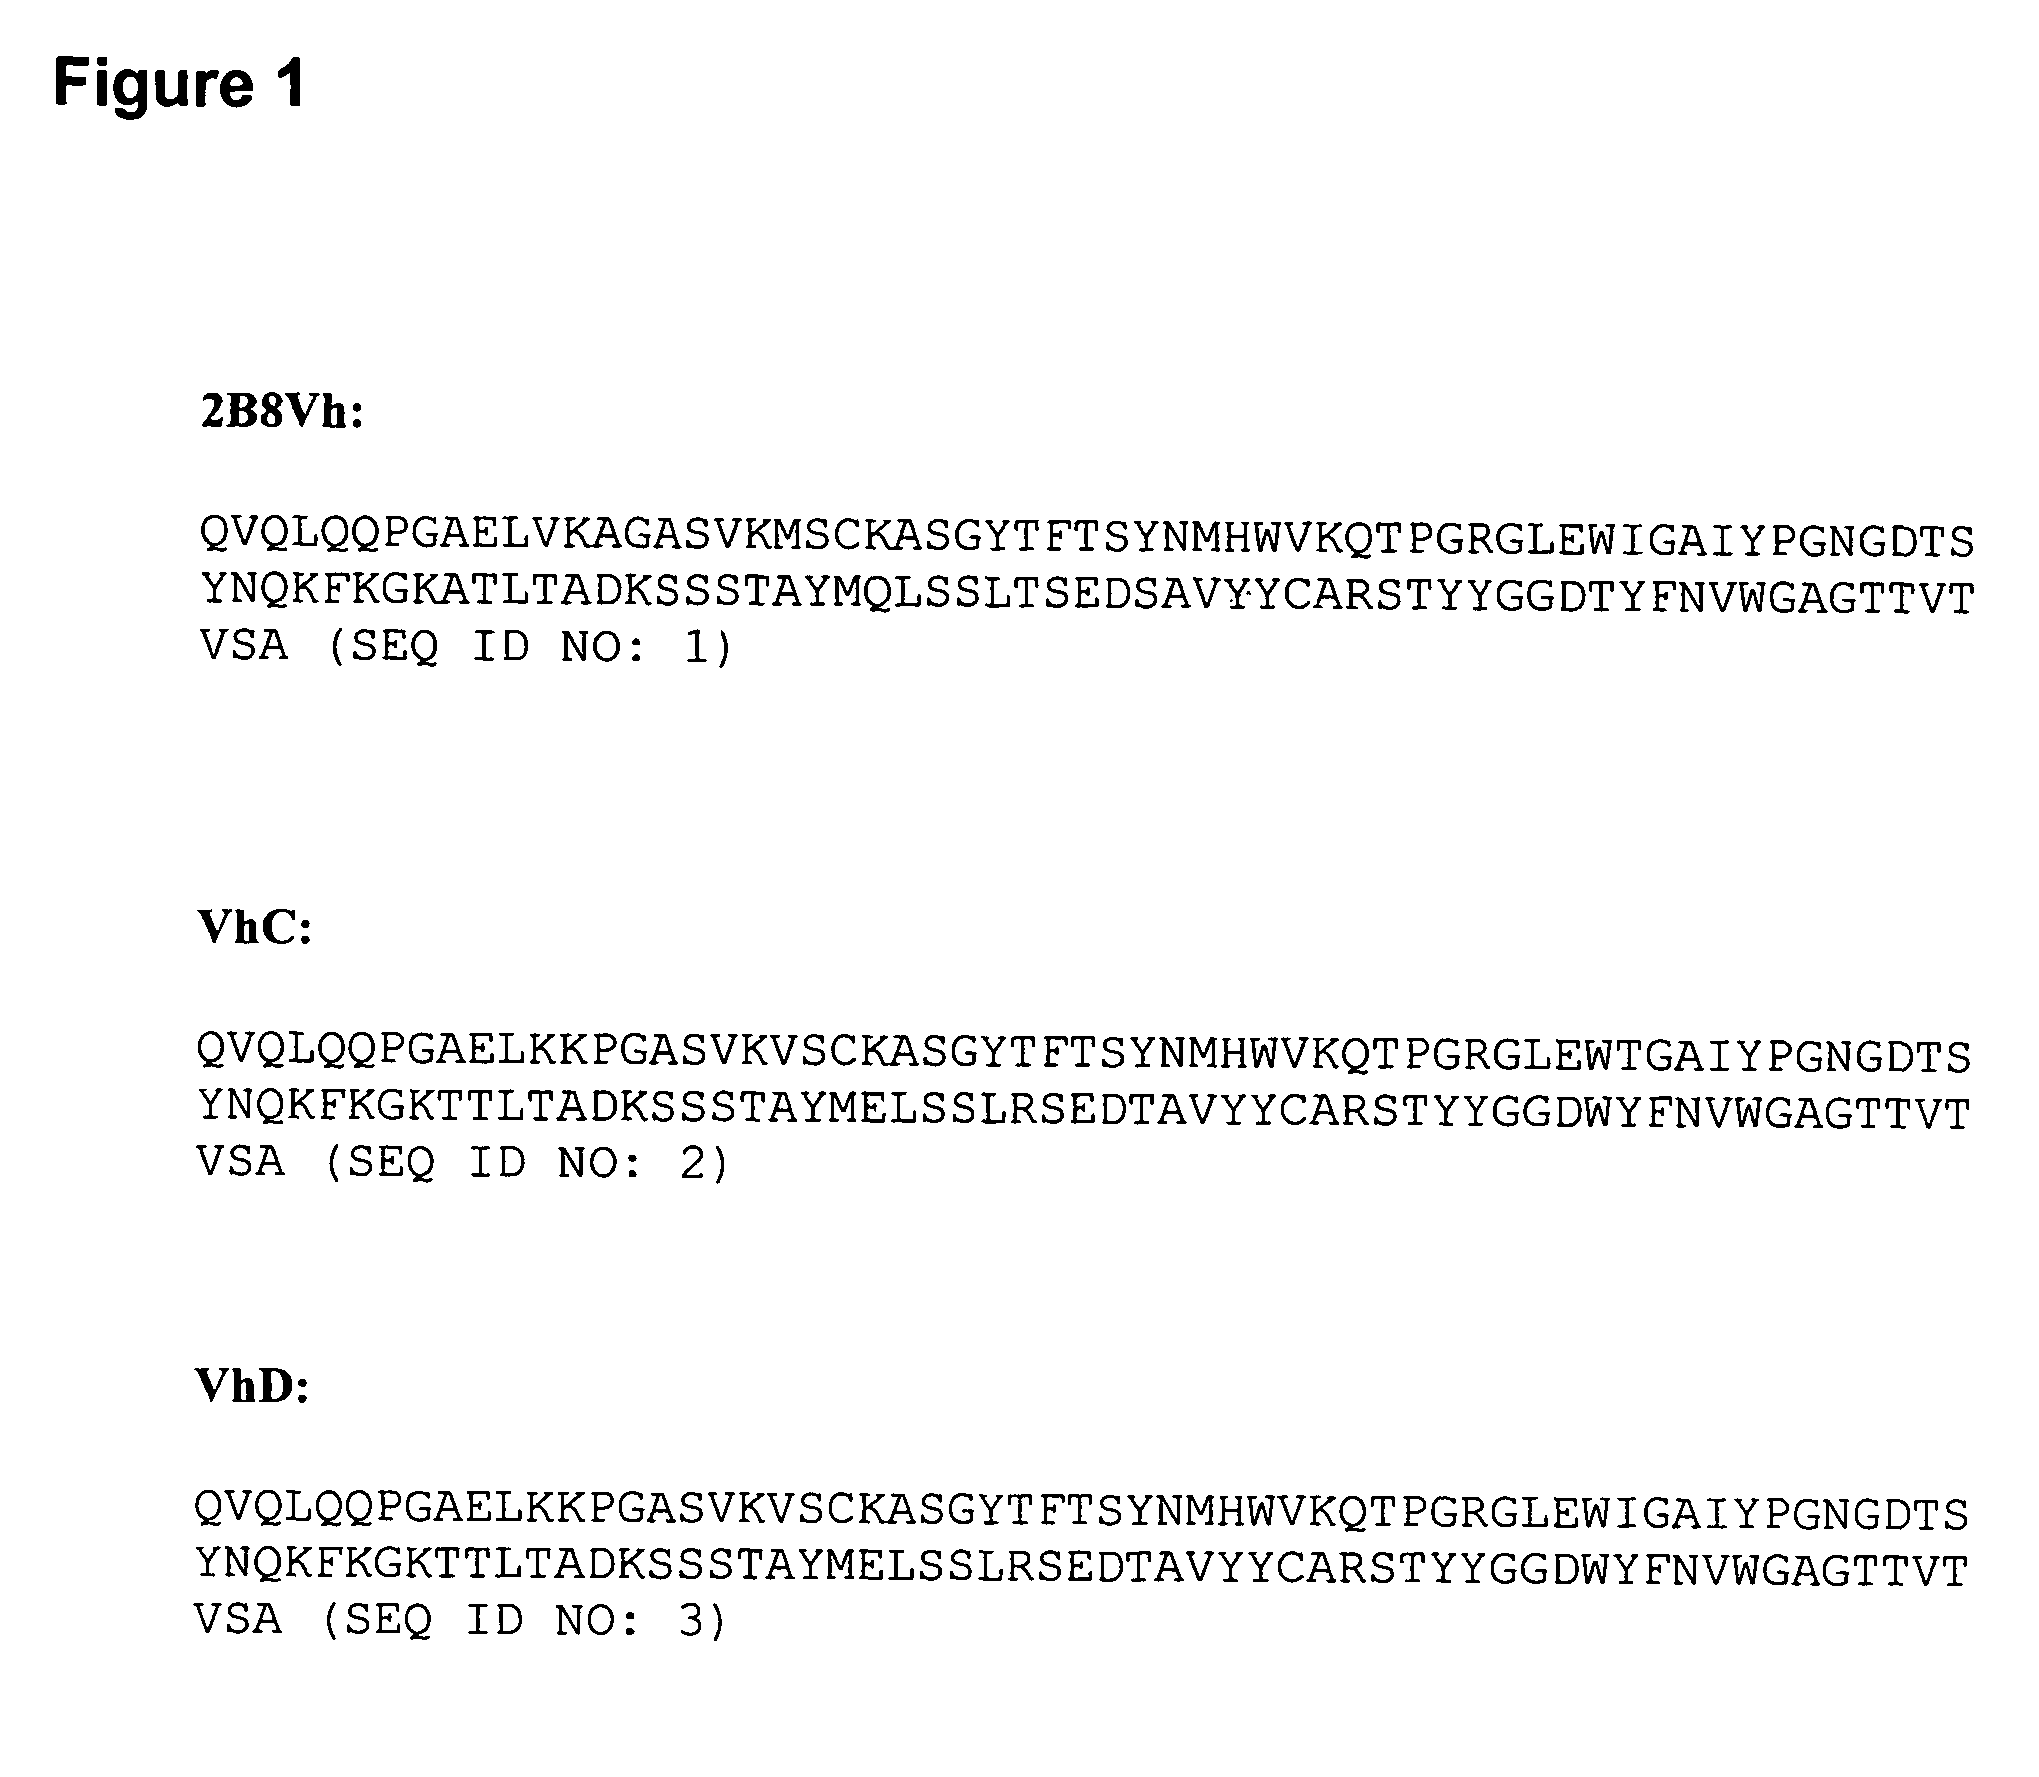 CD20-binding polypeptide compositions and methods